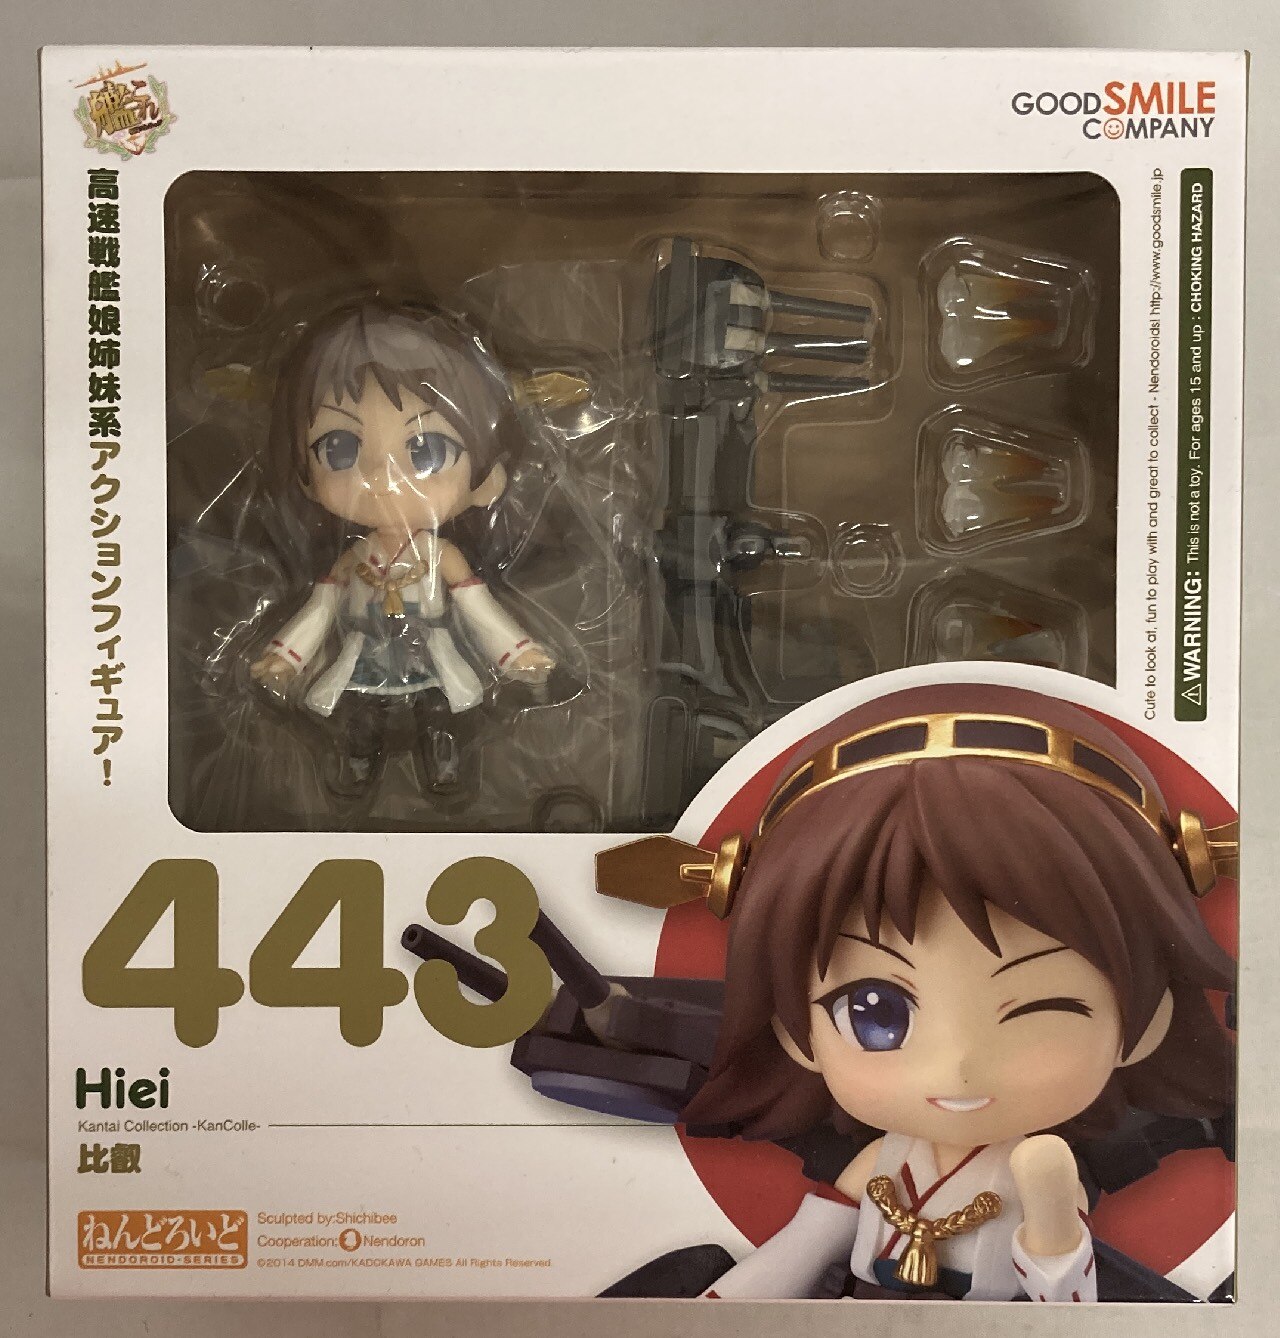 FROM JAPAN Kan Colle Good Smile Company Nendoroid 443 Hiei Kantai Collection